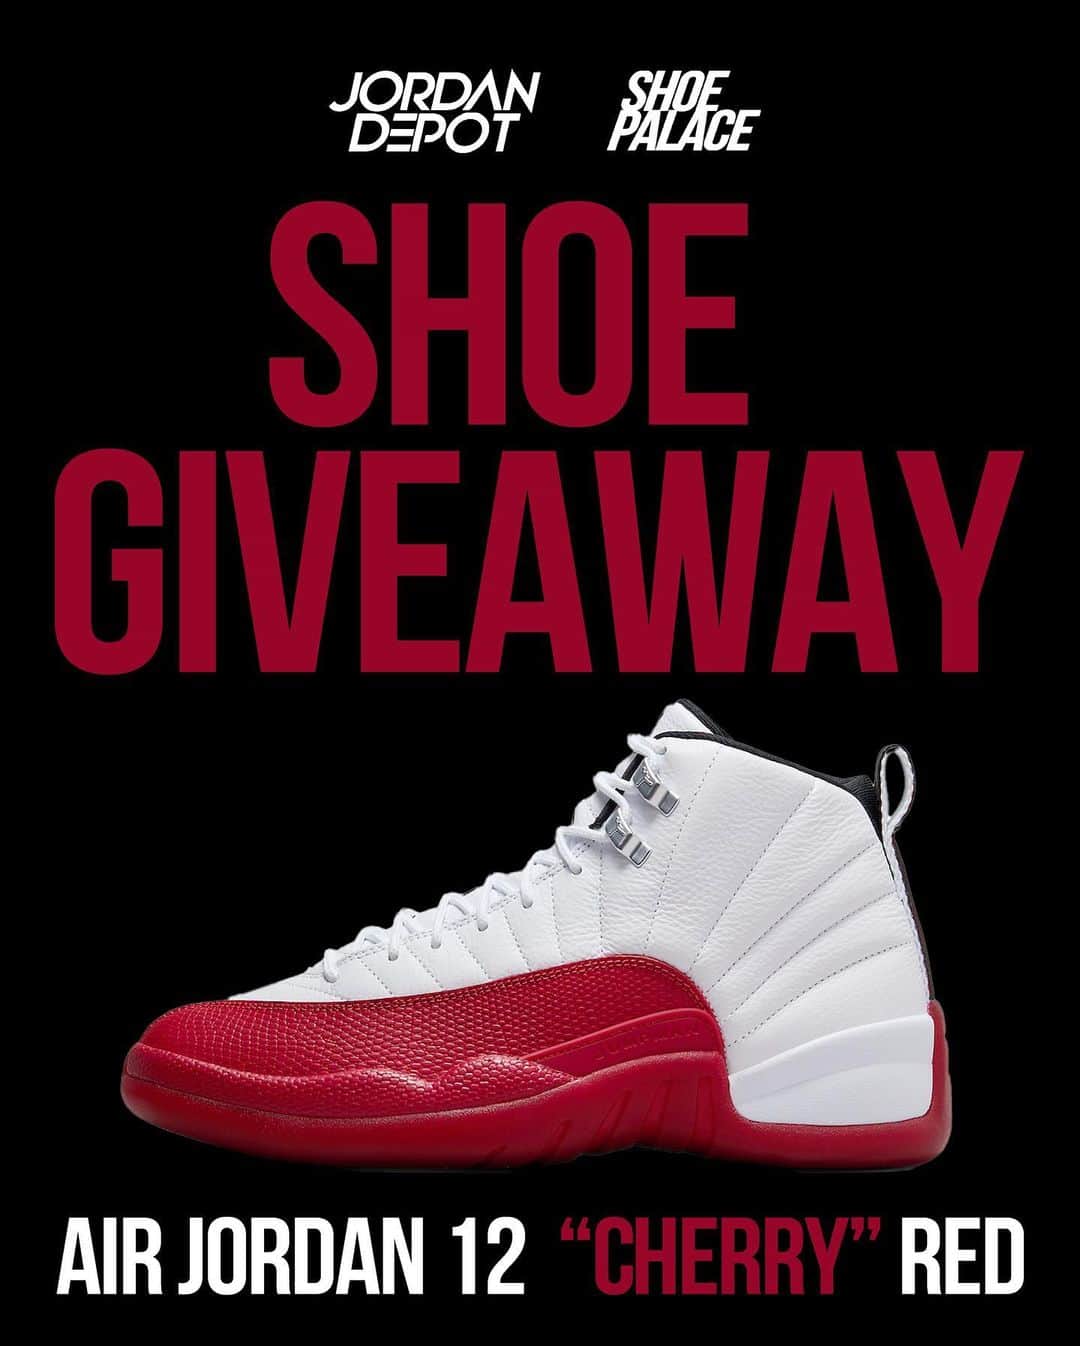 jordandepotのインスタグラム：「We're giving away two (2) pairs of Men's Air Jordan 12 Retro 'Cherry' Red’s  See instructions below to enter: 1.  Like this post 2.  Follow @shoepalace and @jordandepot on IG 3.  Comment your shoe size and tag three friends  Giveaway is open to U.S. residents only and ends Tuesday 10.31.2023 at 7PM PST. All communication will come from @JordanDepot only. The randomly selected winner will be notified via DM and will have 24 hours to respond. Good luck!」